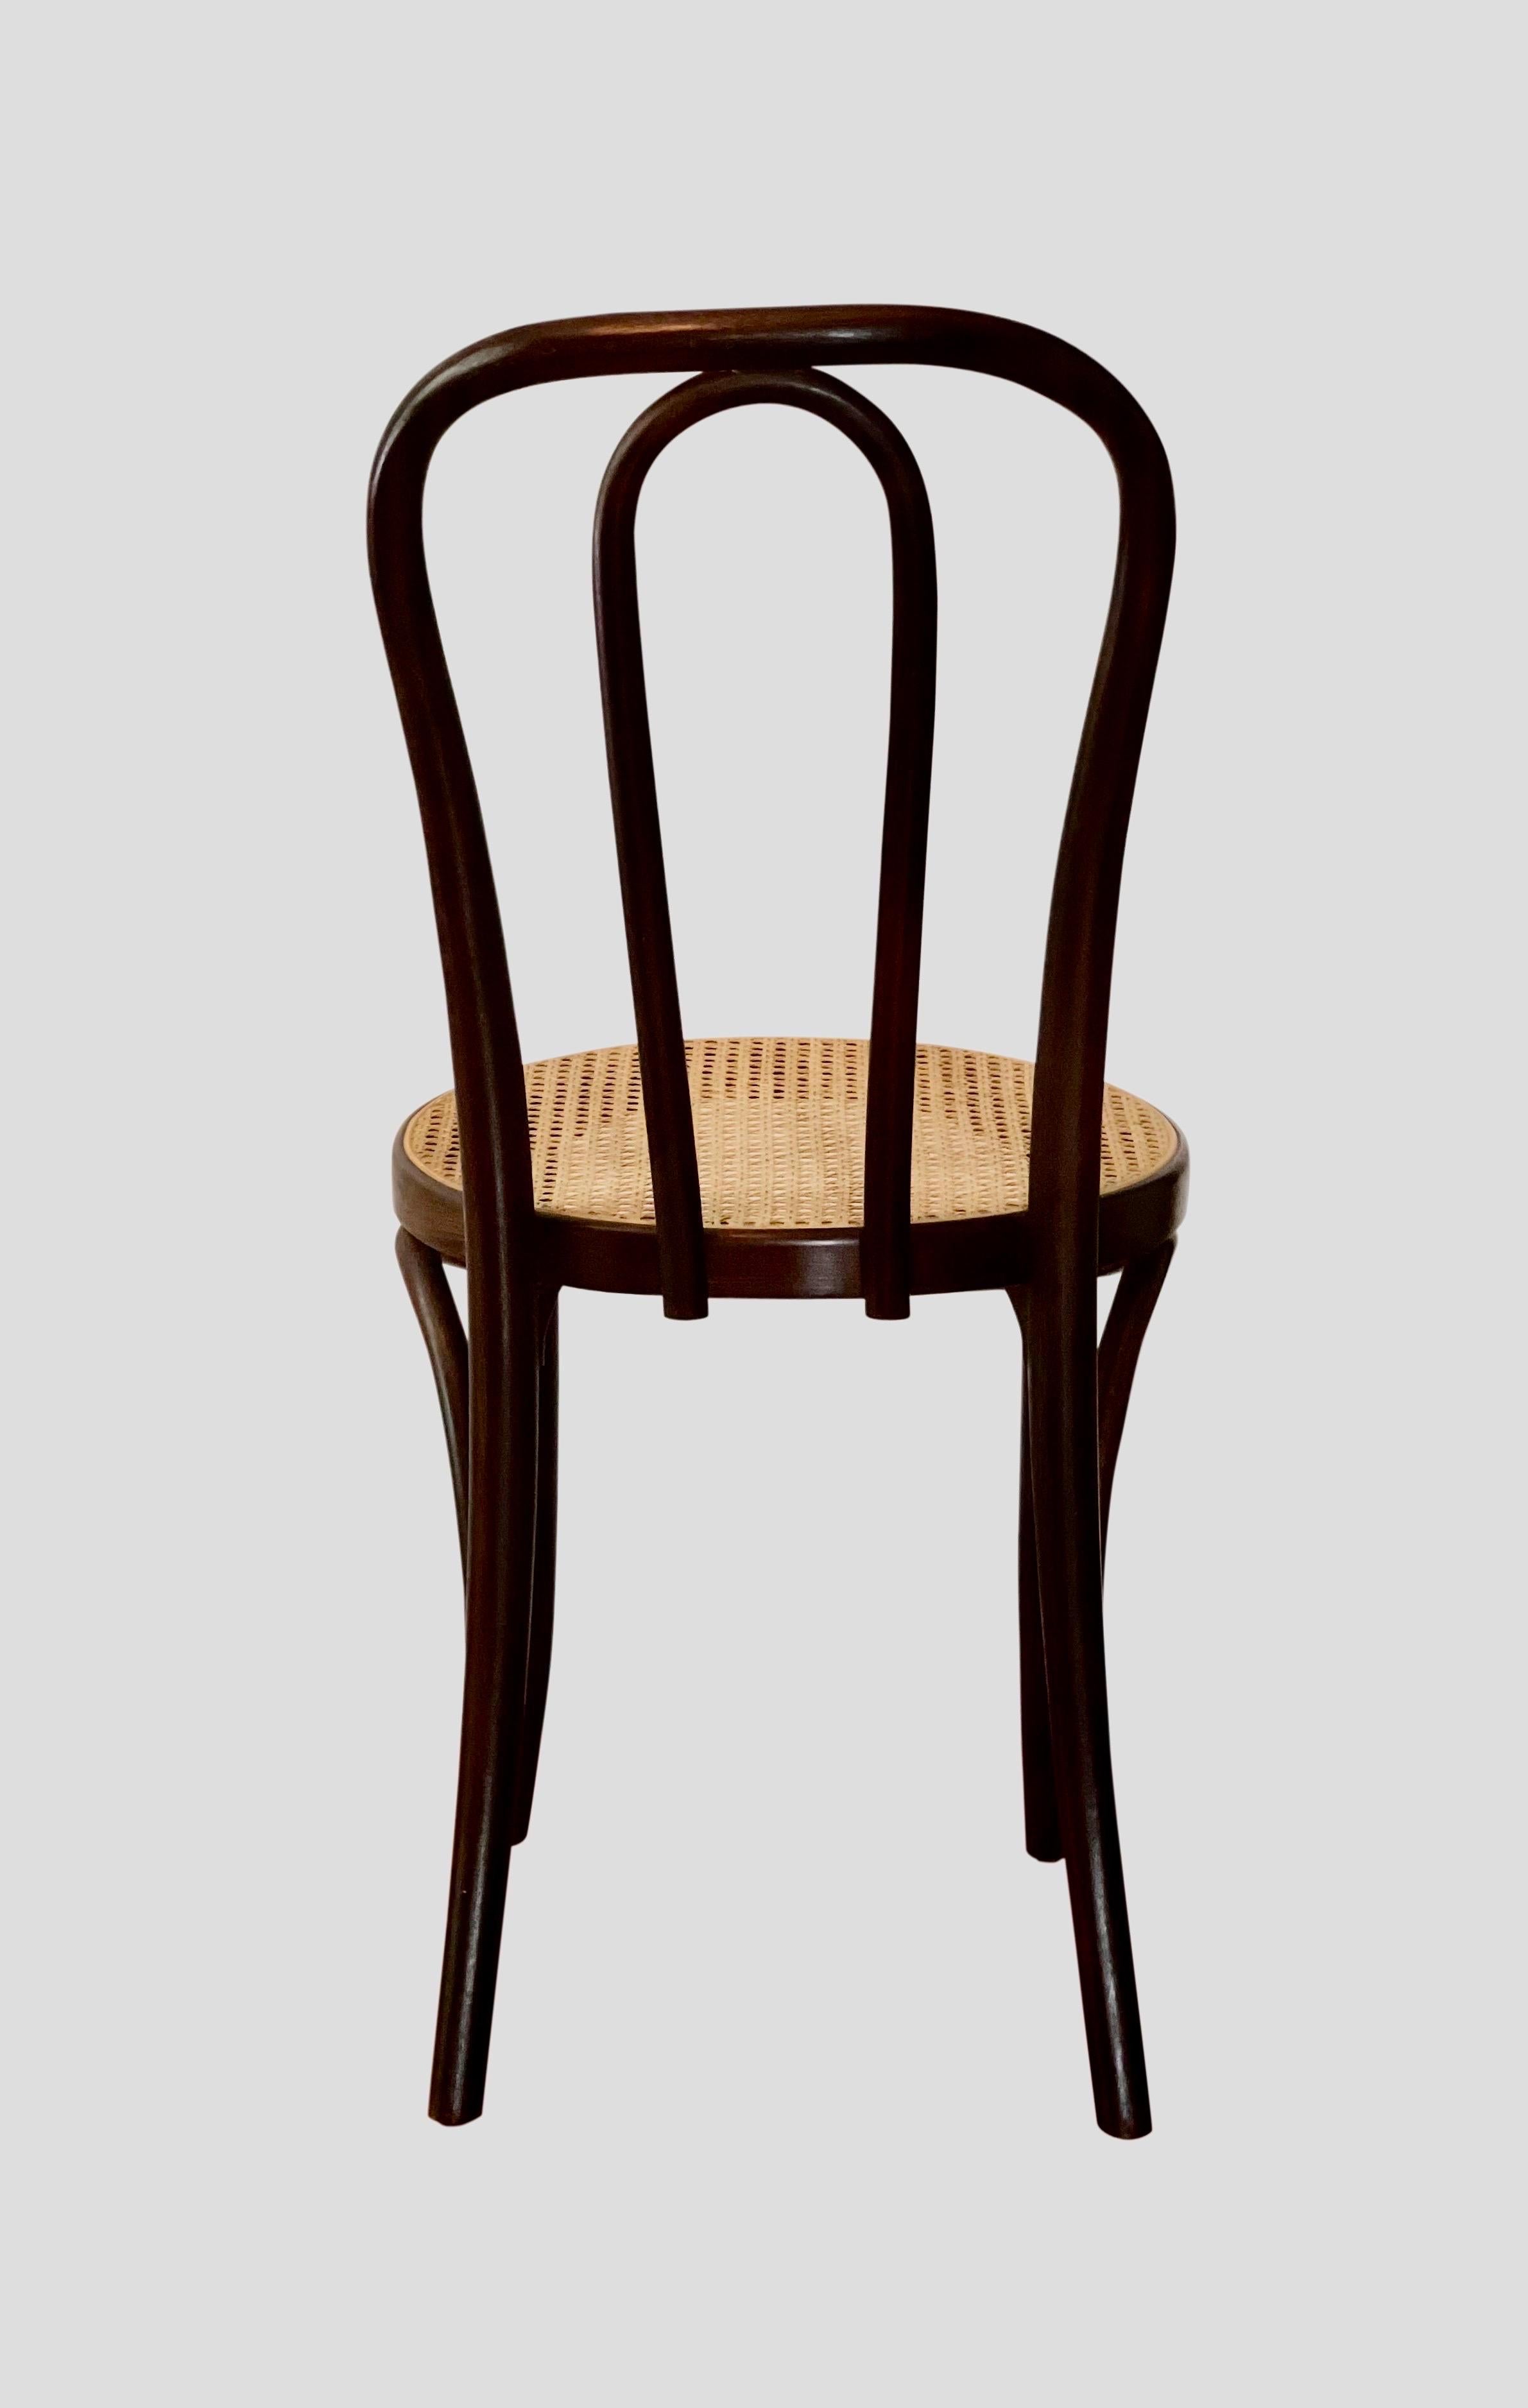 Bauhaus Thonet Bentwood Cane Bistro or Side Chair, 1920's For Sale